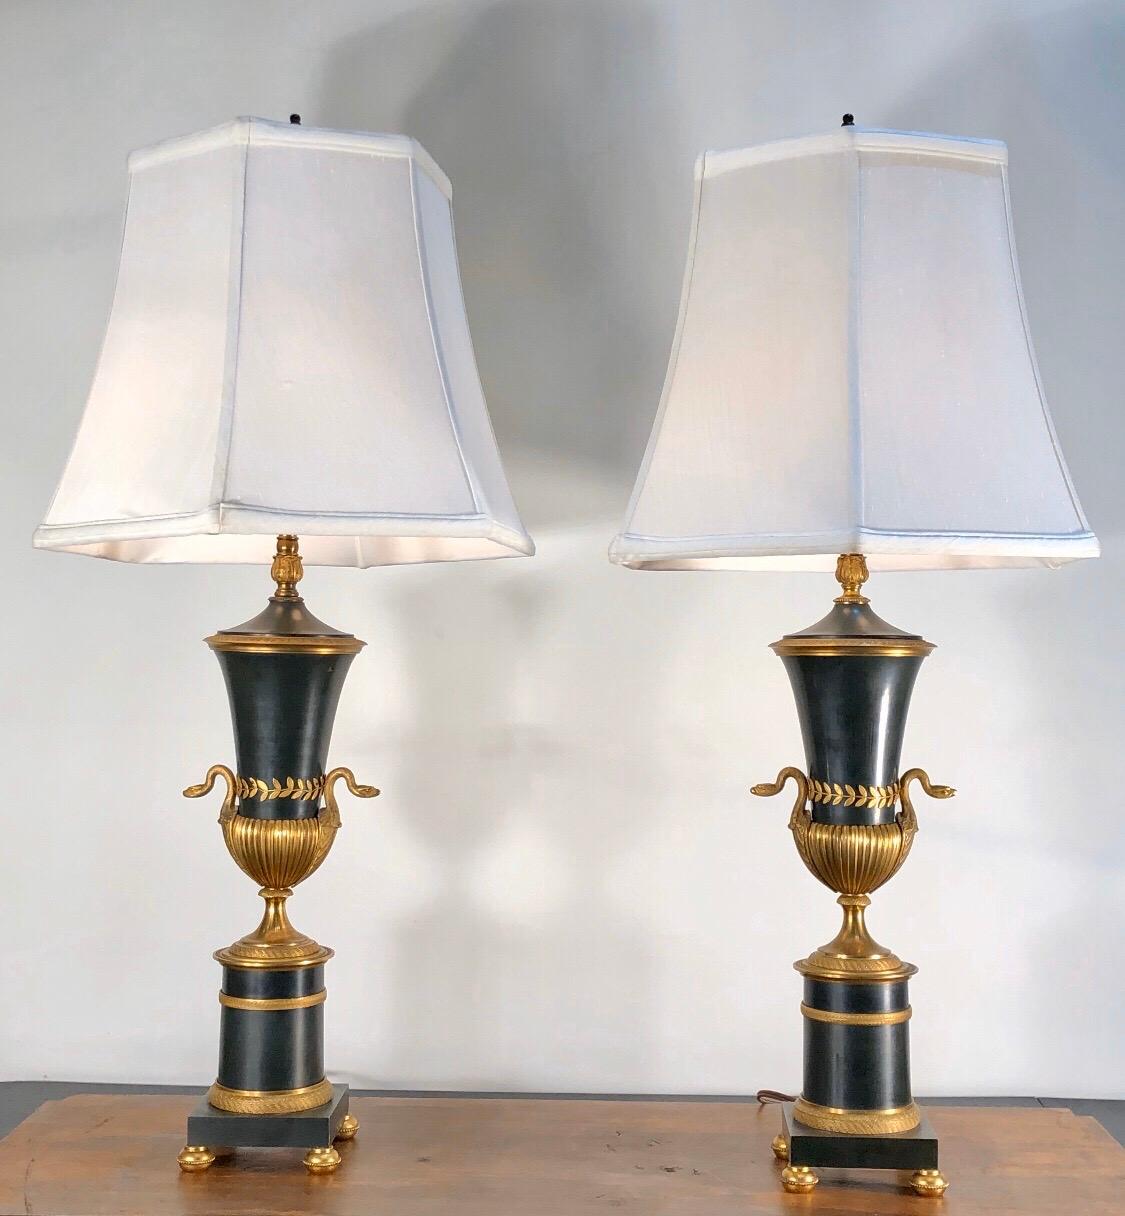 Magnificent pair of early 19th century French Empire urns with ormolu-mounts converted to lamps. These Period Empire table lamps have the original gilt and patinated bronze finish. The ormolu-mounts are of the highest quality with the finest